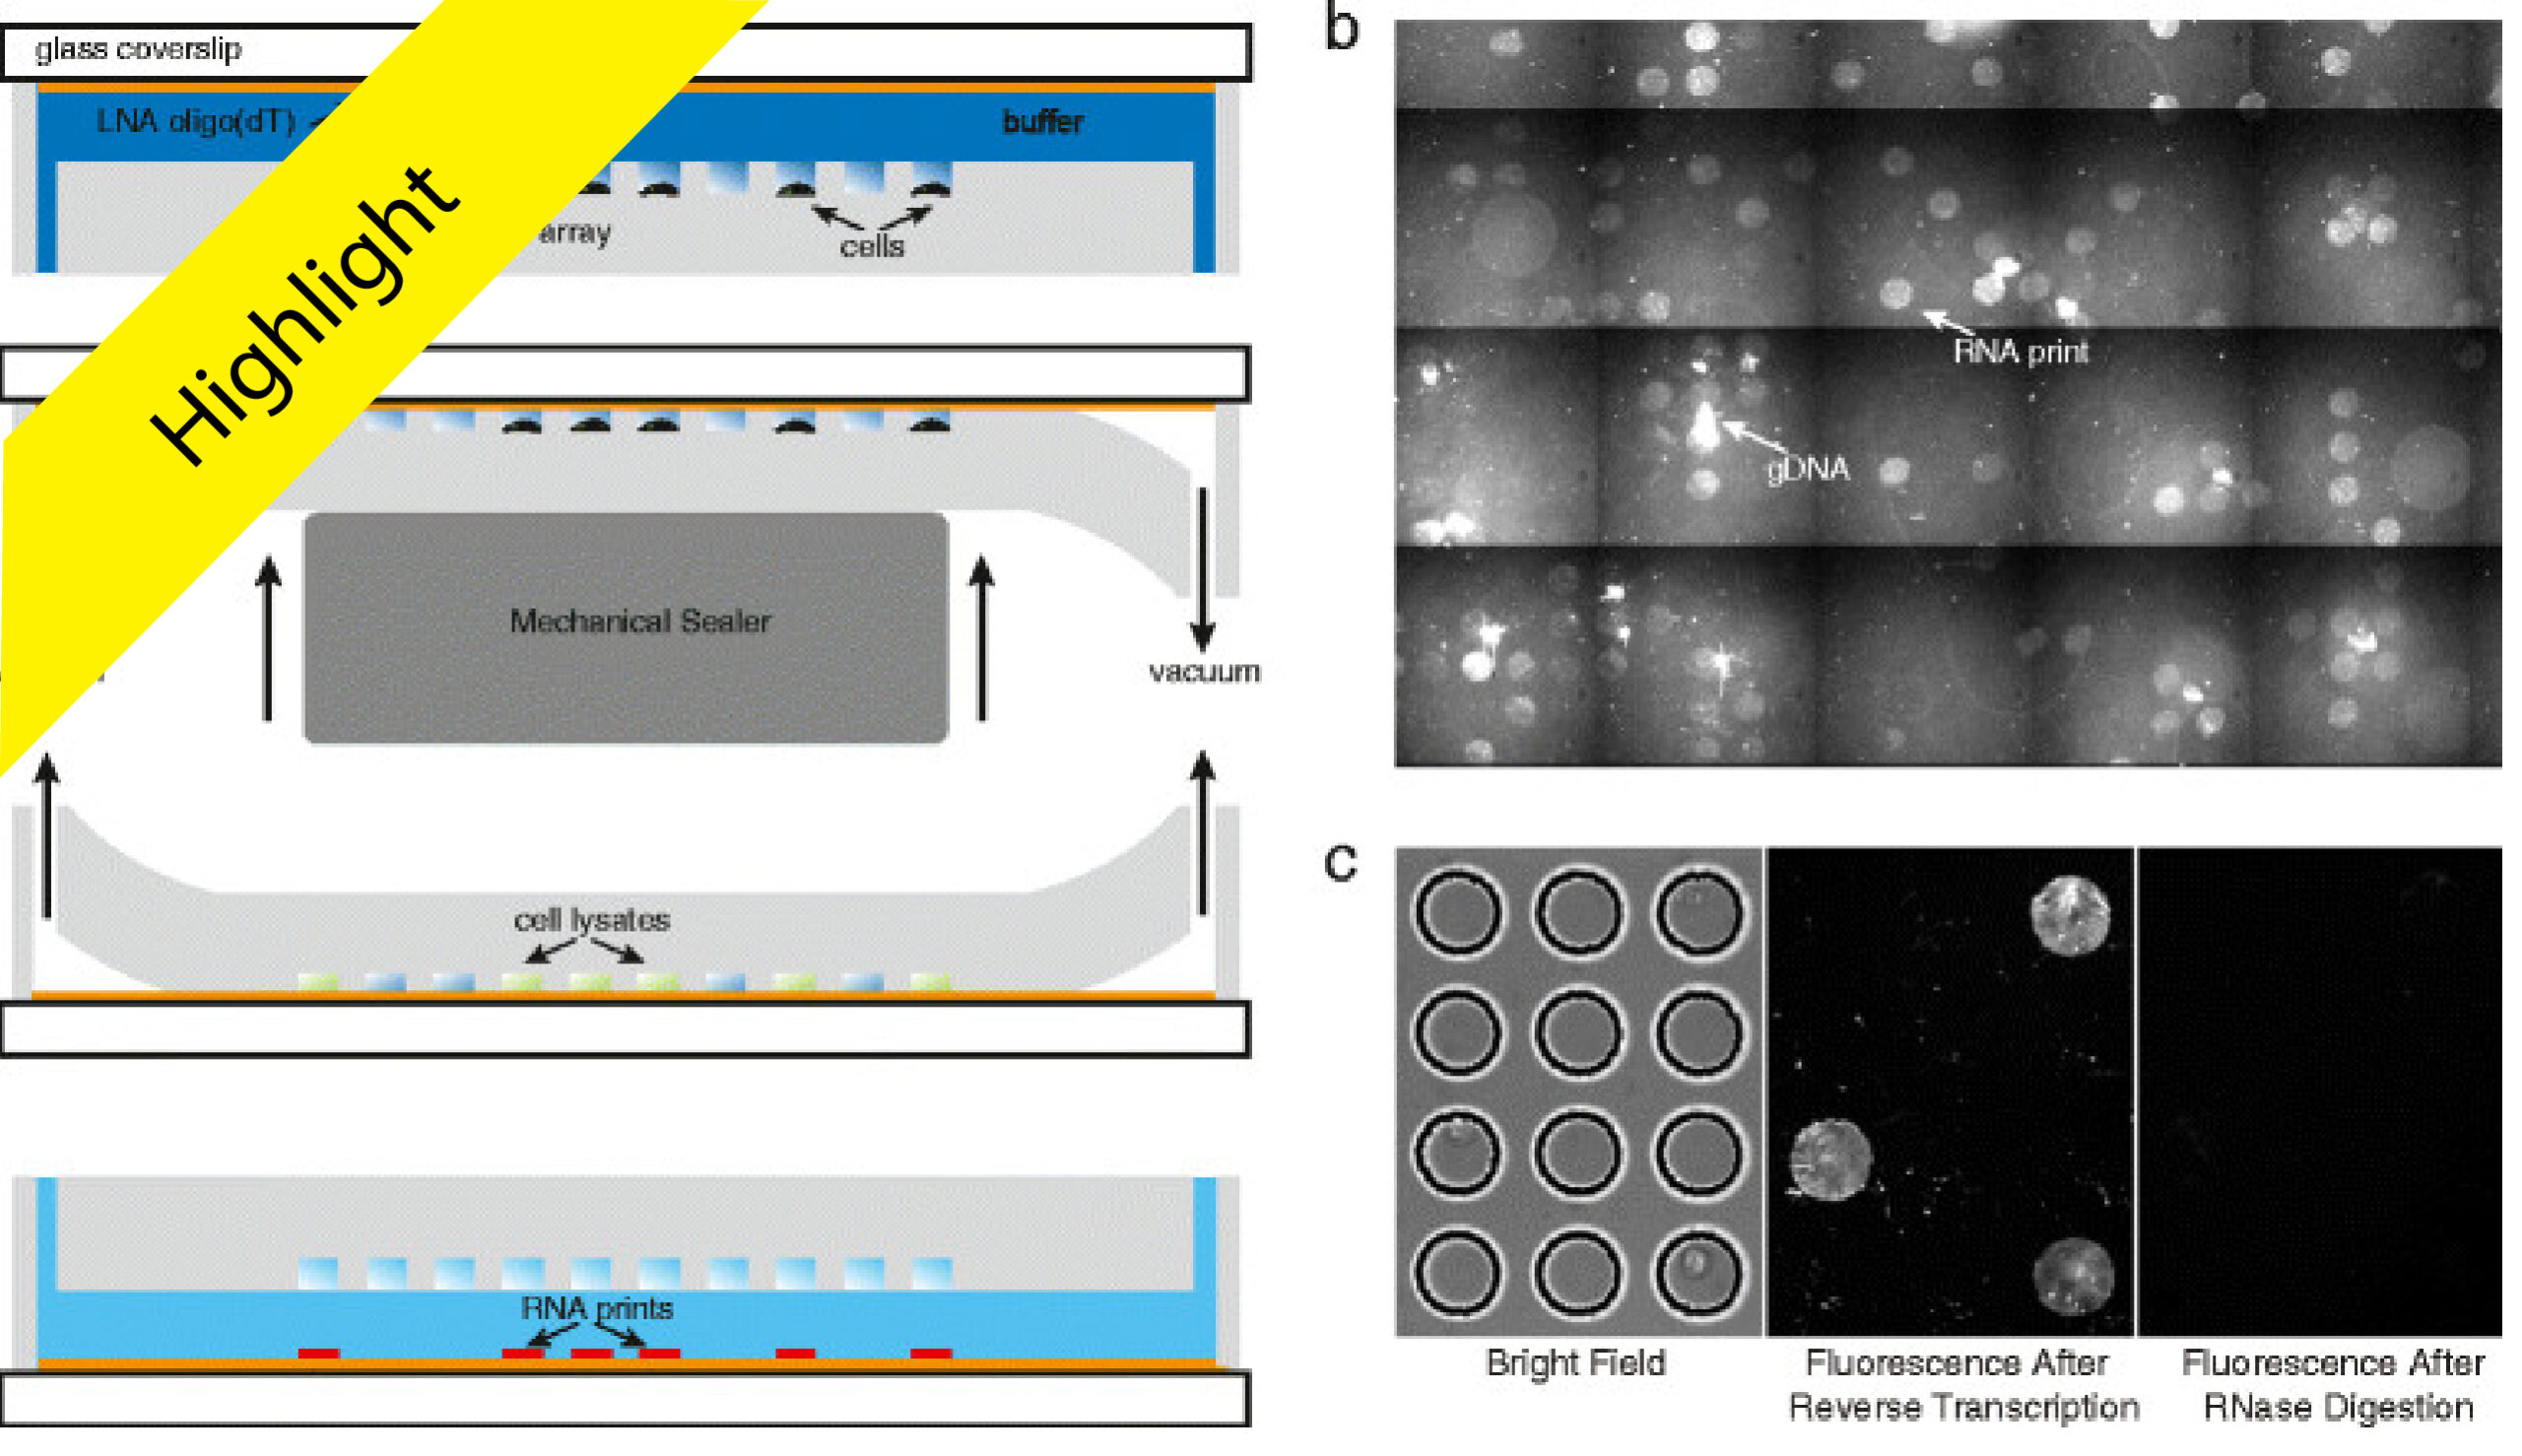 Marrying microfluidics and microwells for parallel, high-throughput single-cell genomics